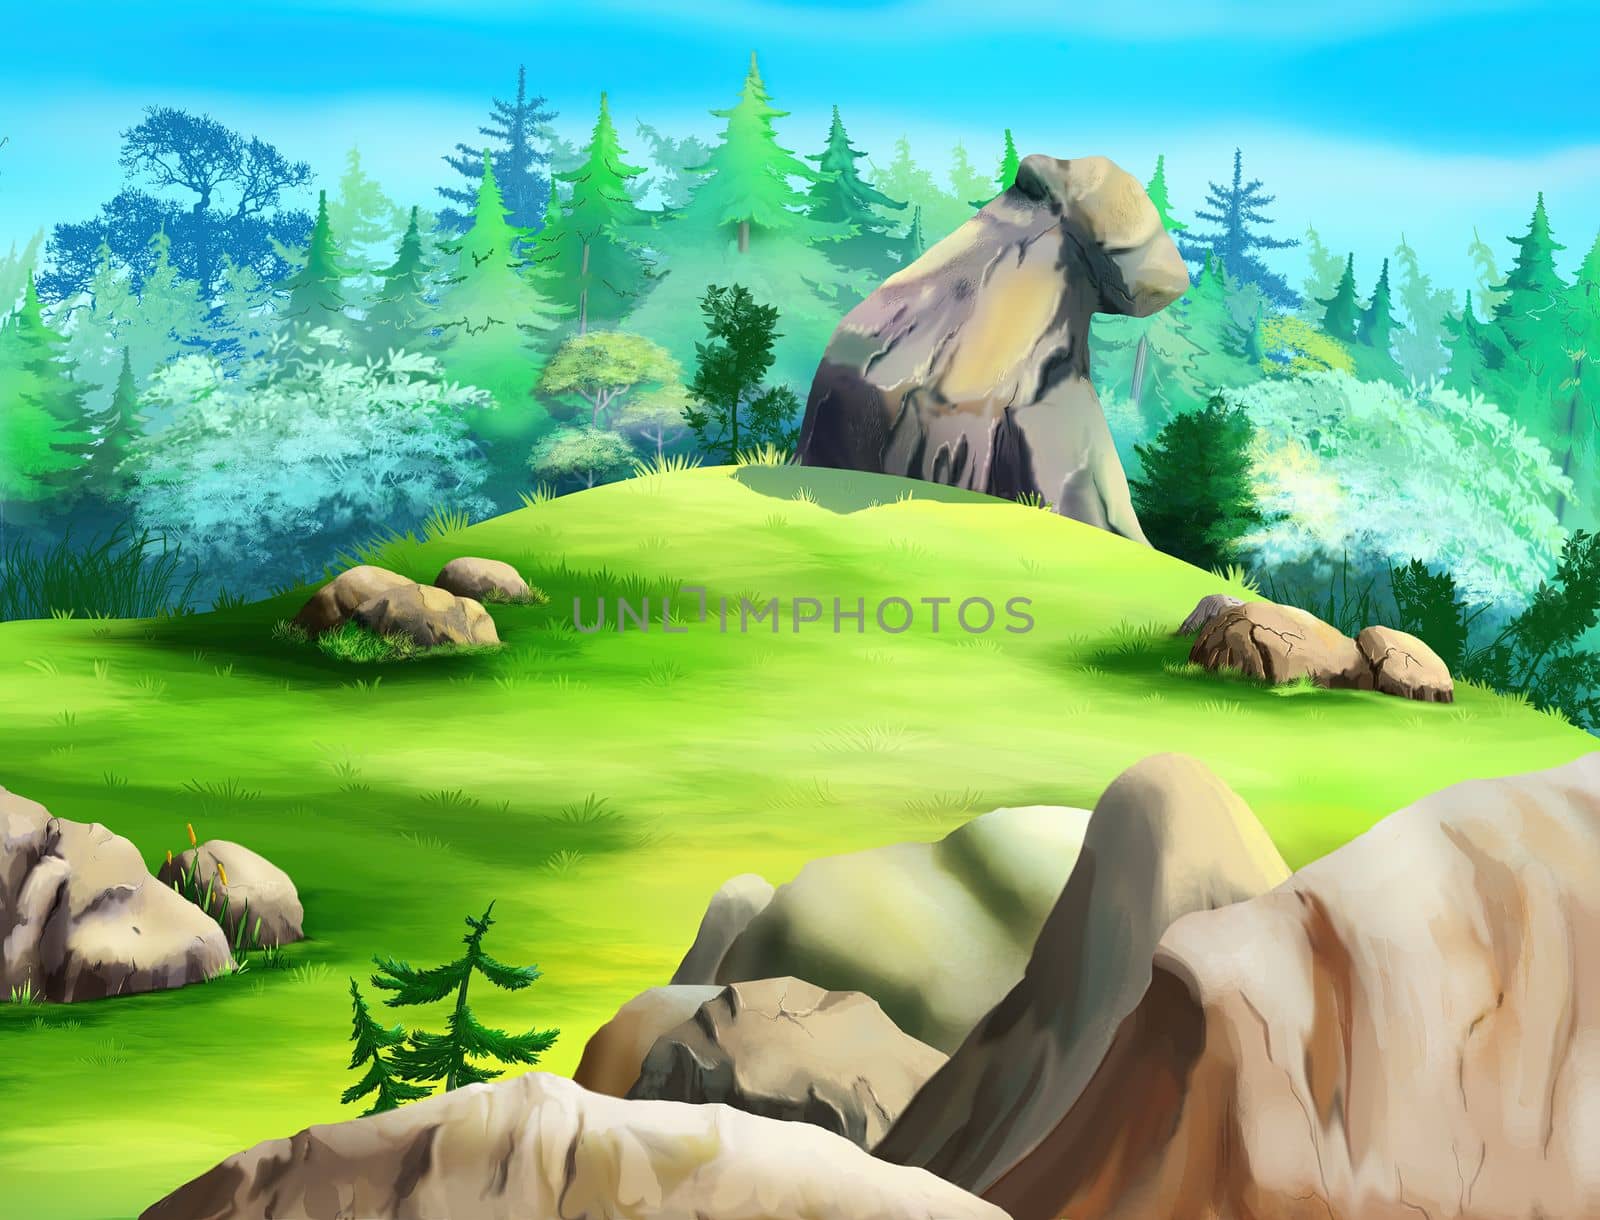 Big Stone block in the forest on a sunny day. Digital Painting Background, Illustration.